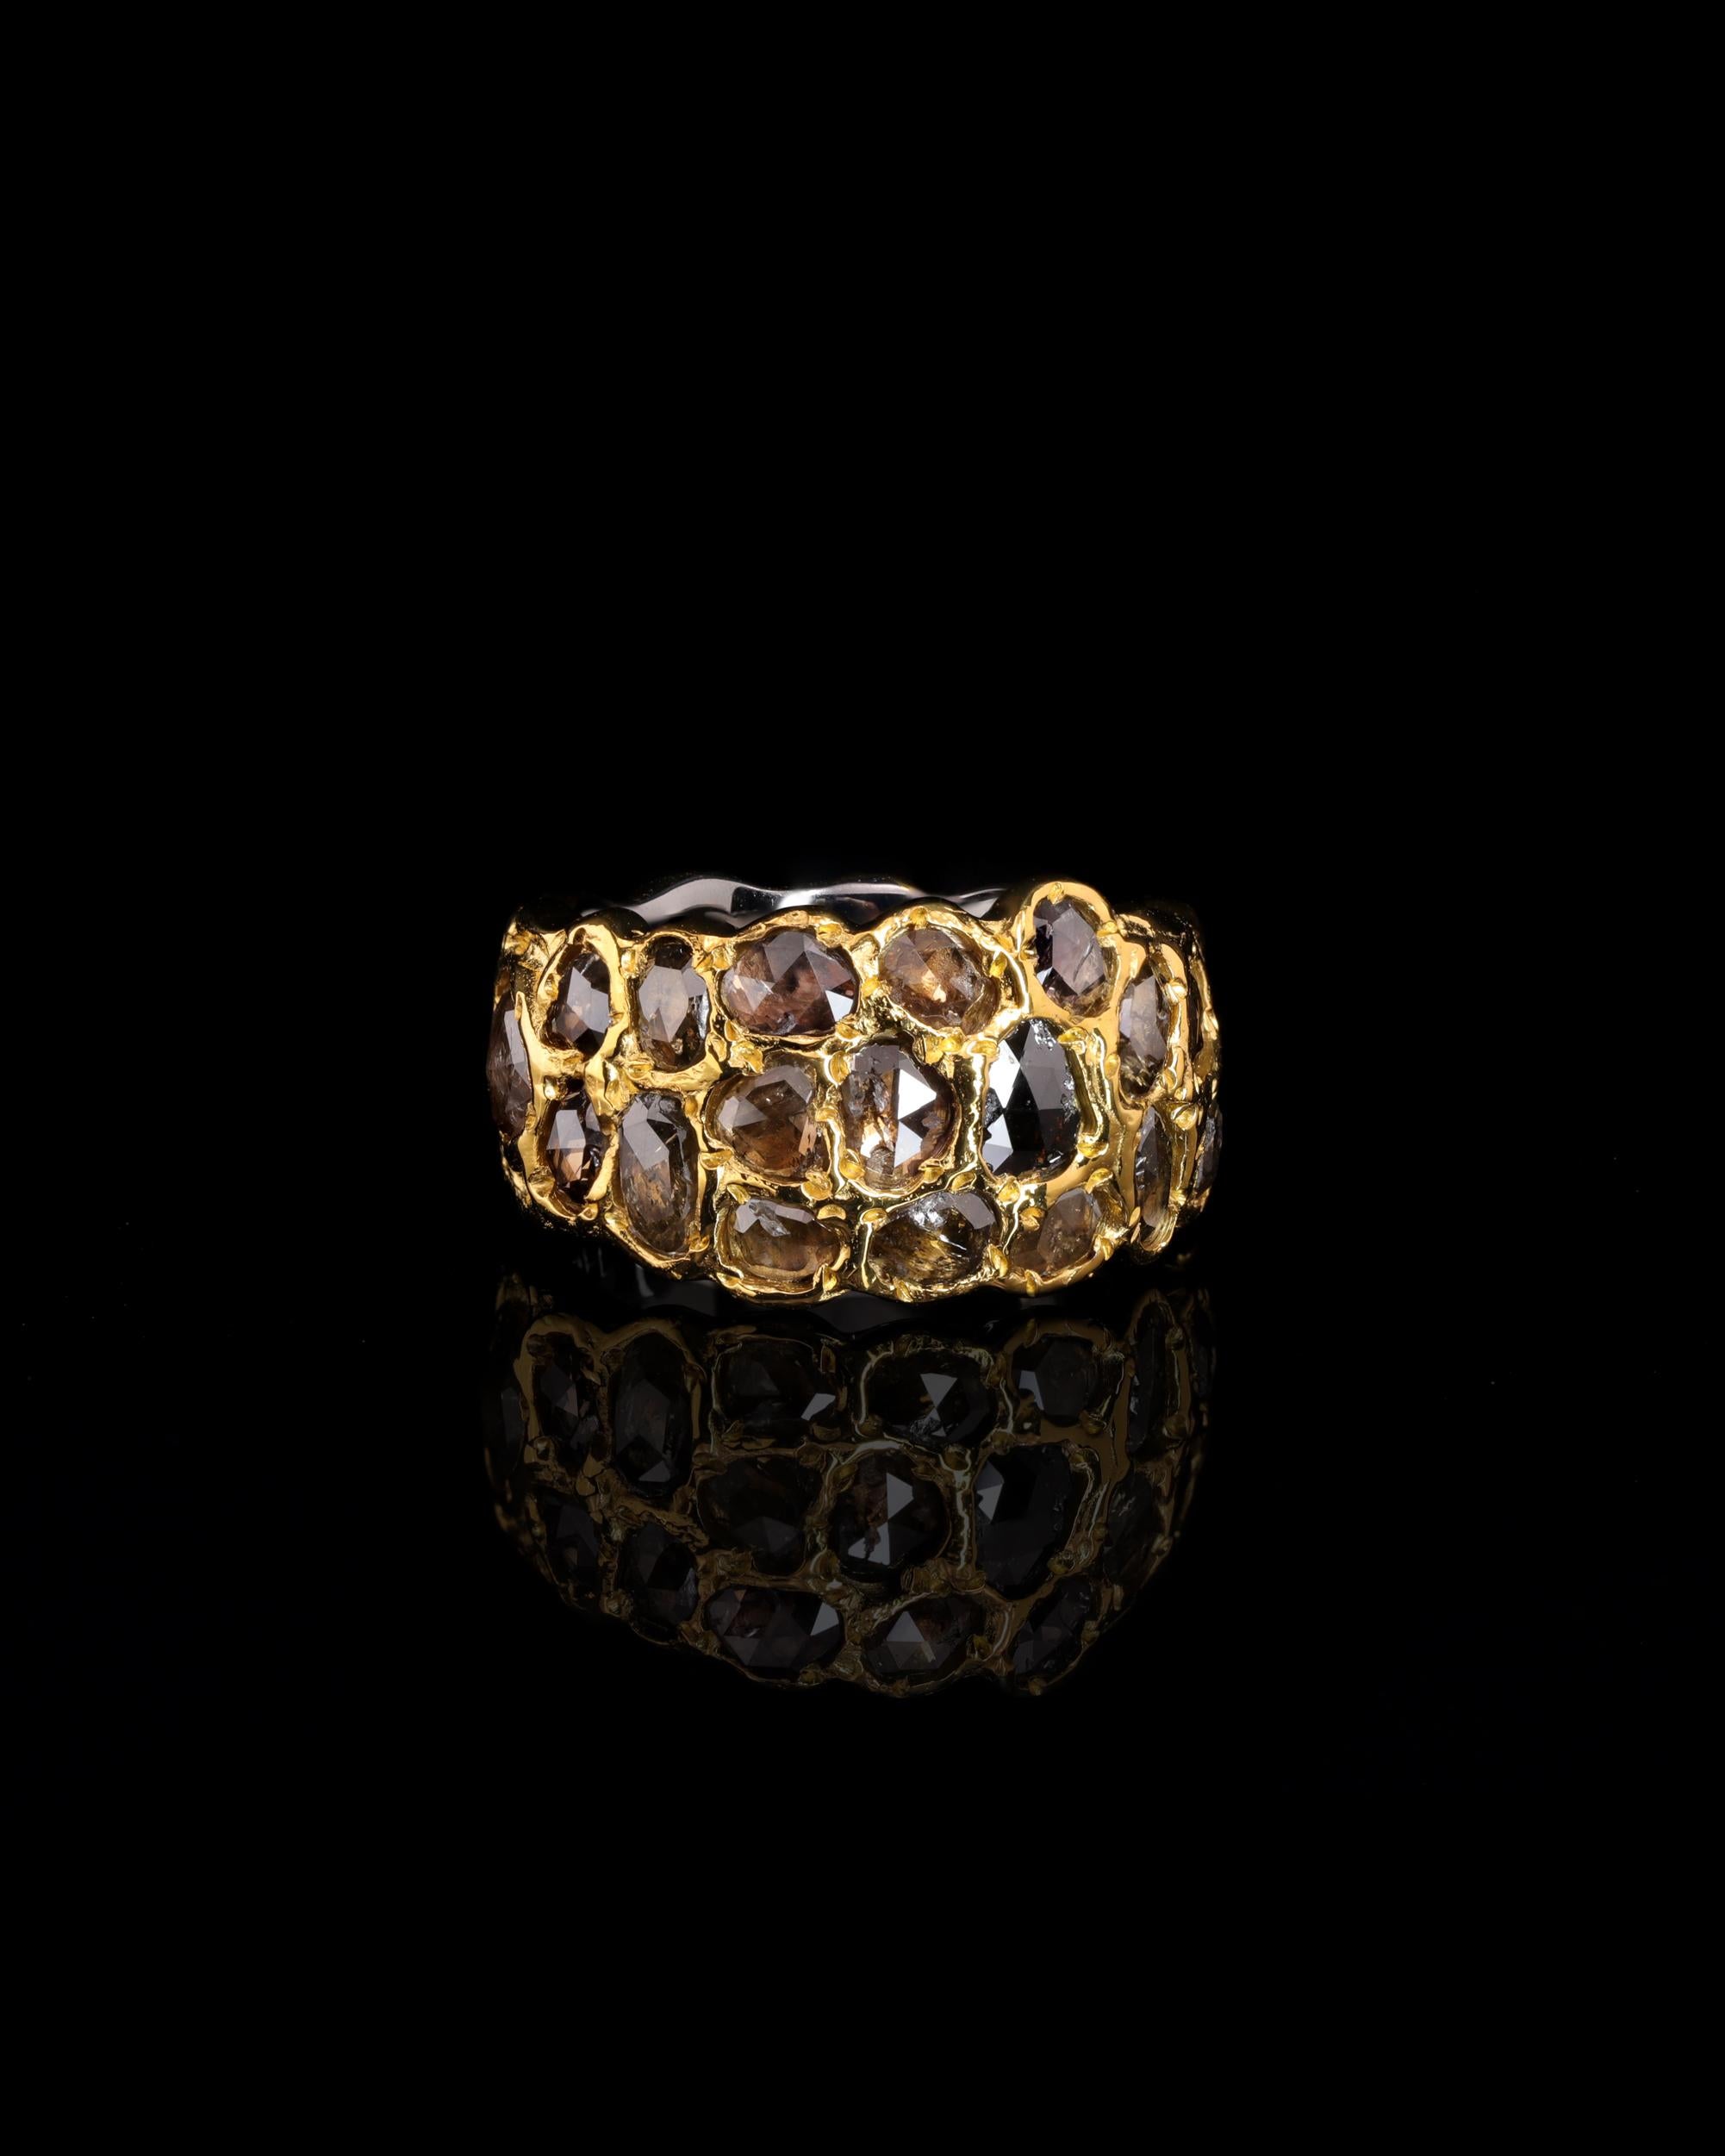 Featuring an exquisite array of raw diamonds, this trinity segmented ring is a true masterpiece. Each diamond is carefully selected and hand-set, creating a stunning contrast with the metal waves that surround them. Just like magma makes its way